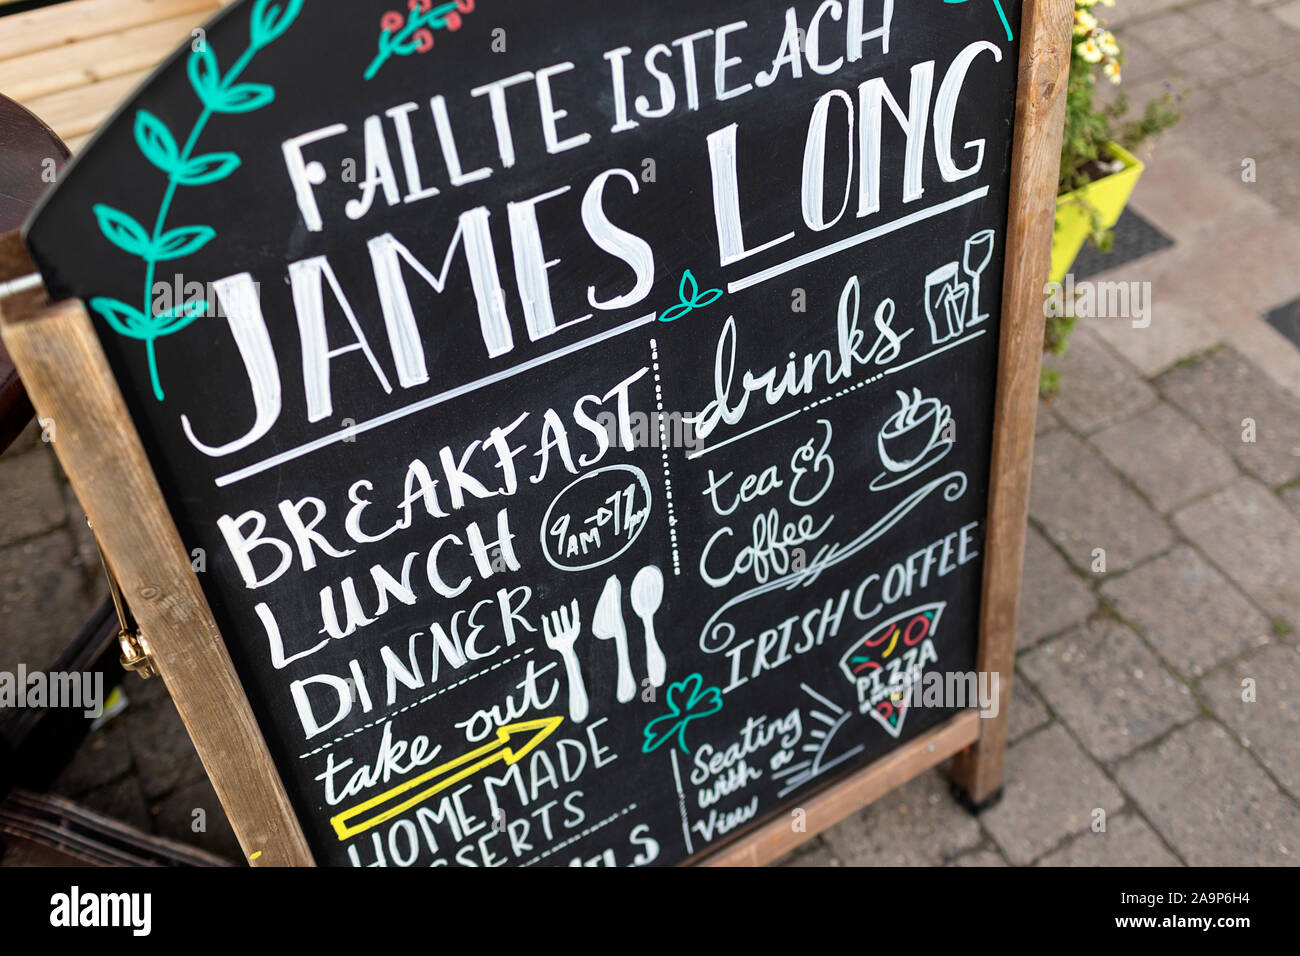 Cafe menu board with today's specials outside the cafe, Dingle, Ireland Stock Photo